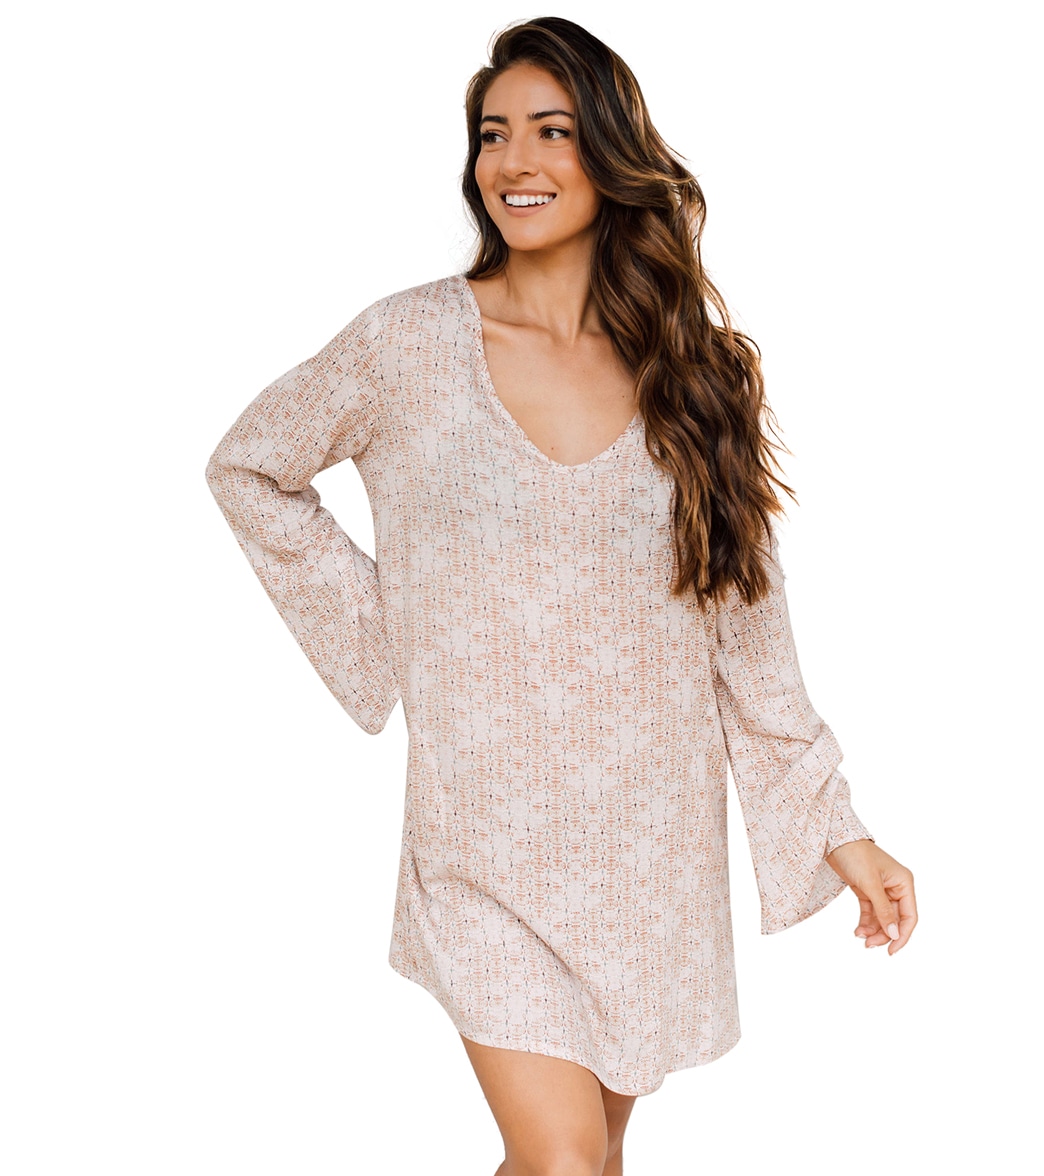 J.valdi Women's Morocco Bell Sleeve Tunic Cover Up - Tan Large - Swimoutlet.com